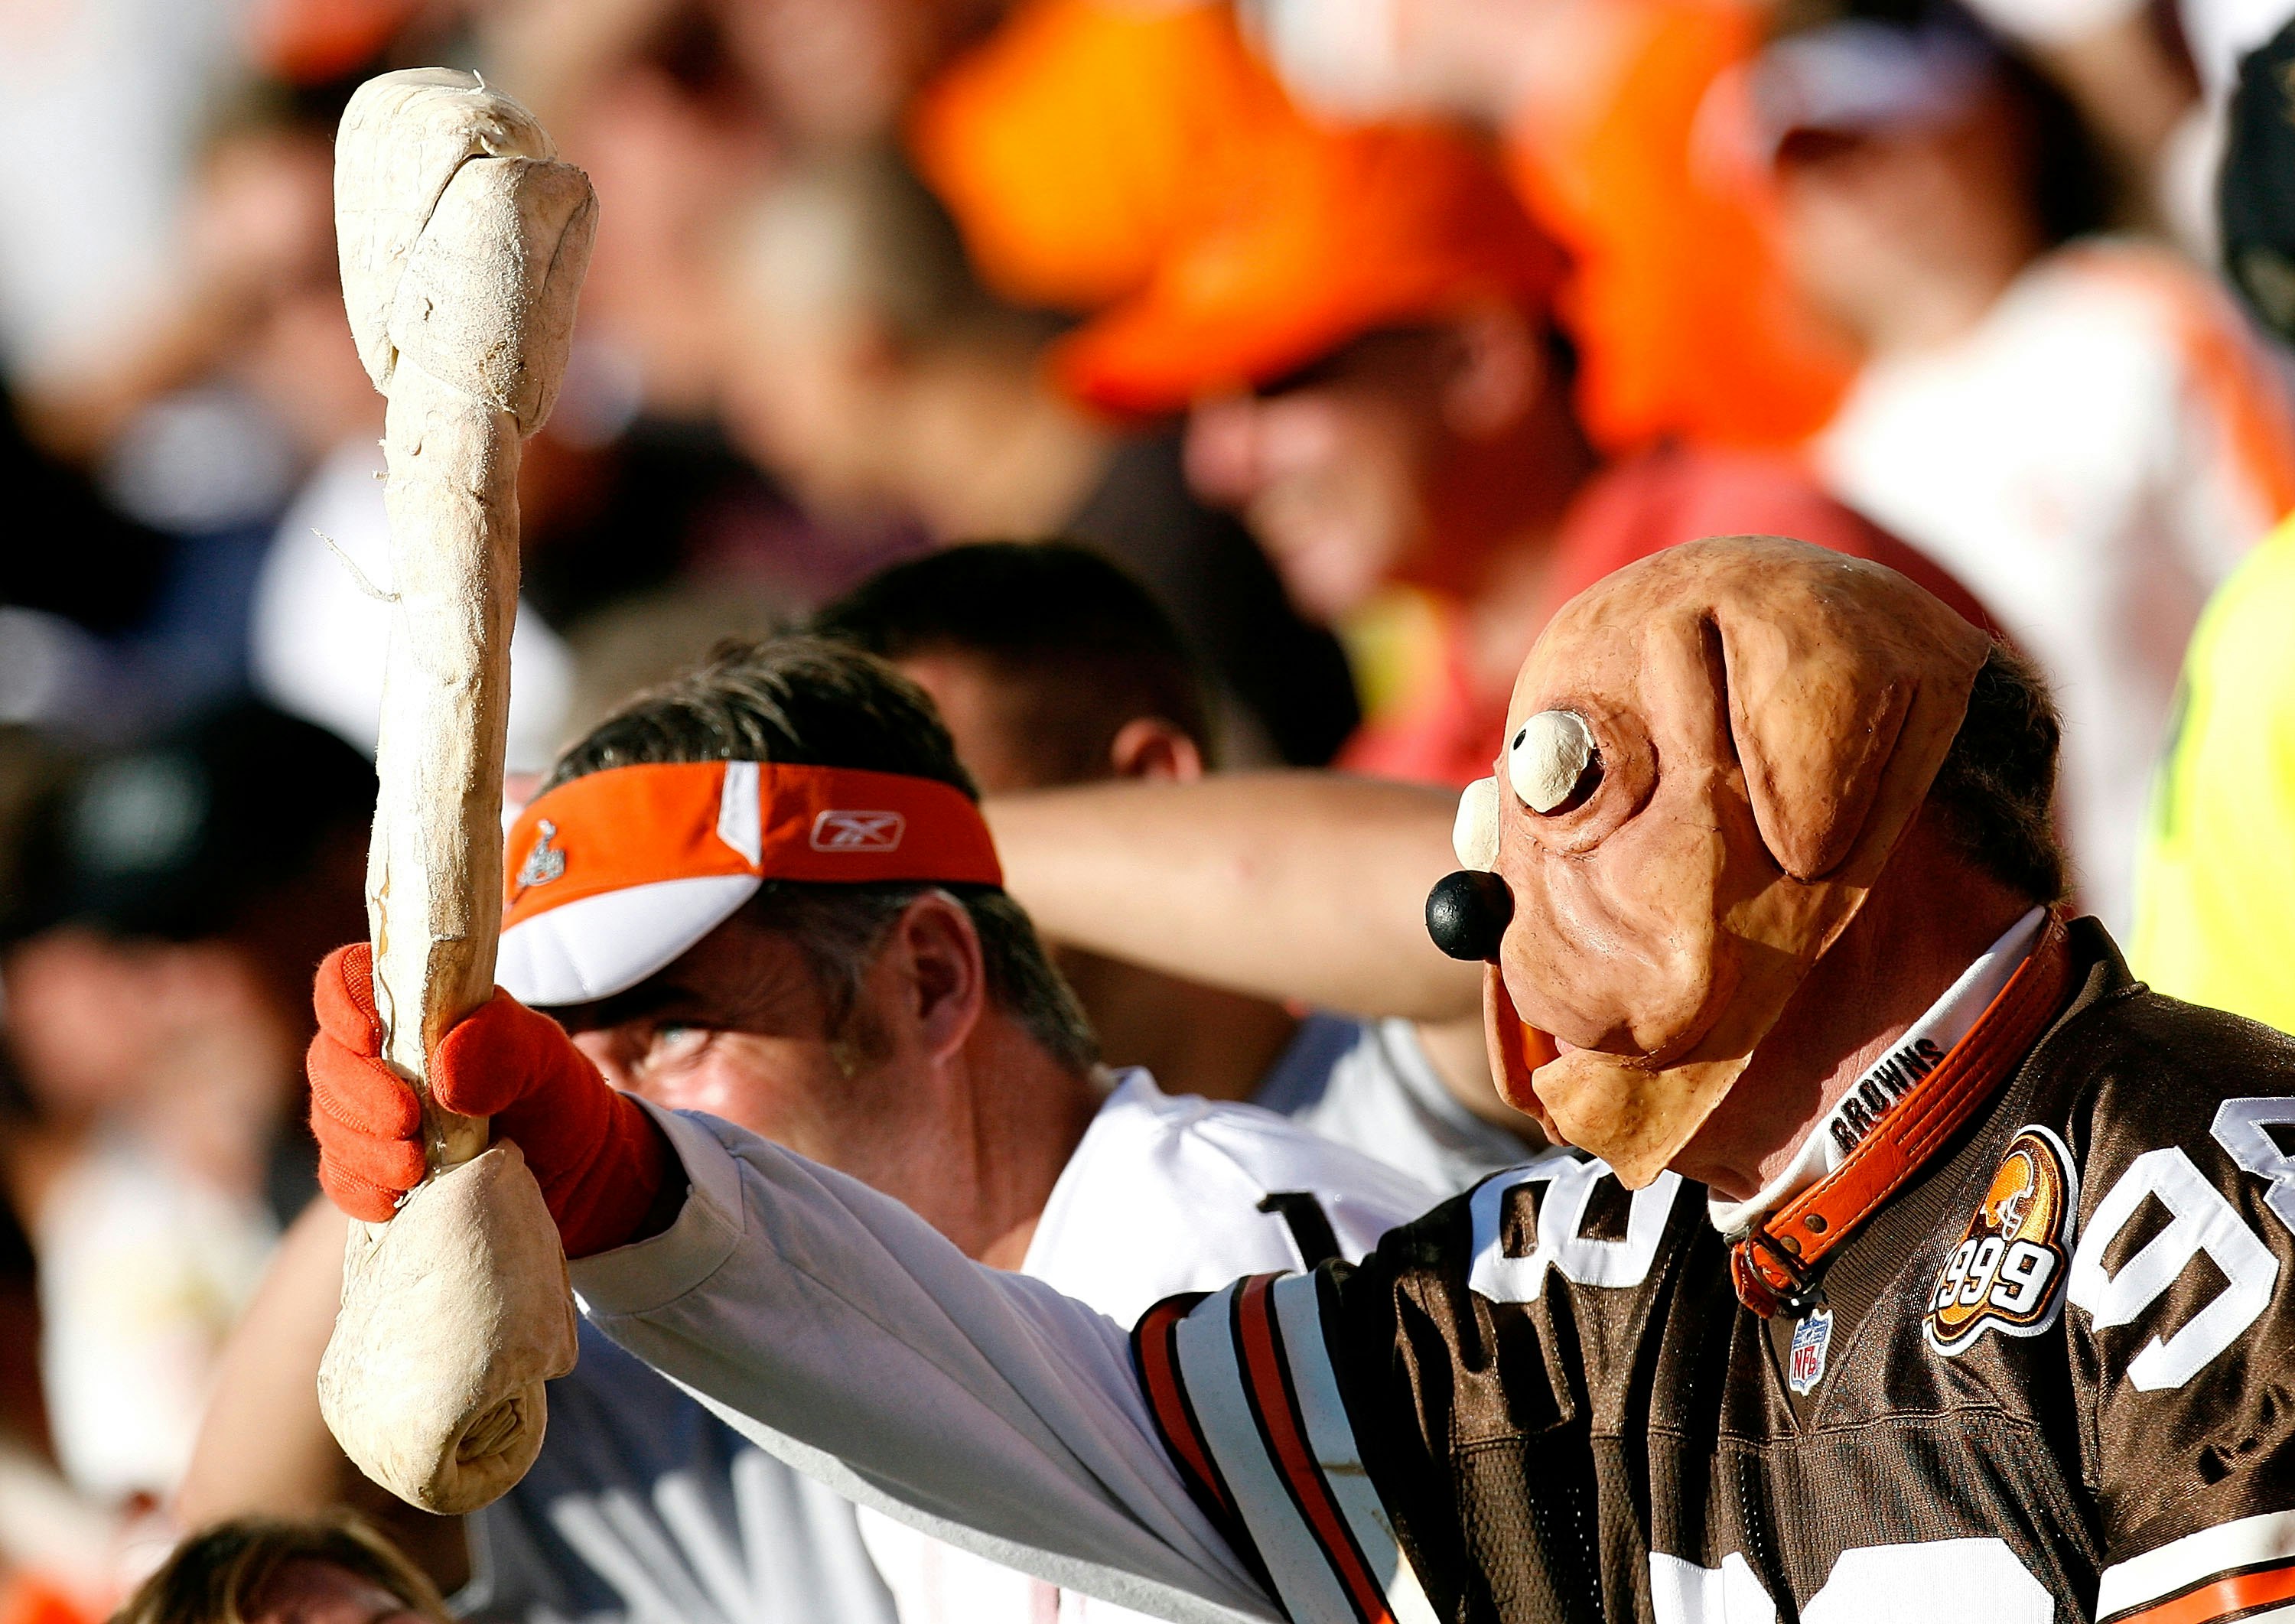 A man wears a dog mask and holds a giant dog bone during an NFL football game; nfl cities travel